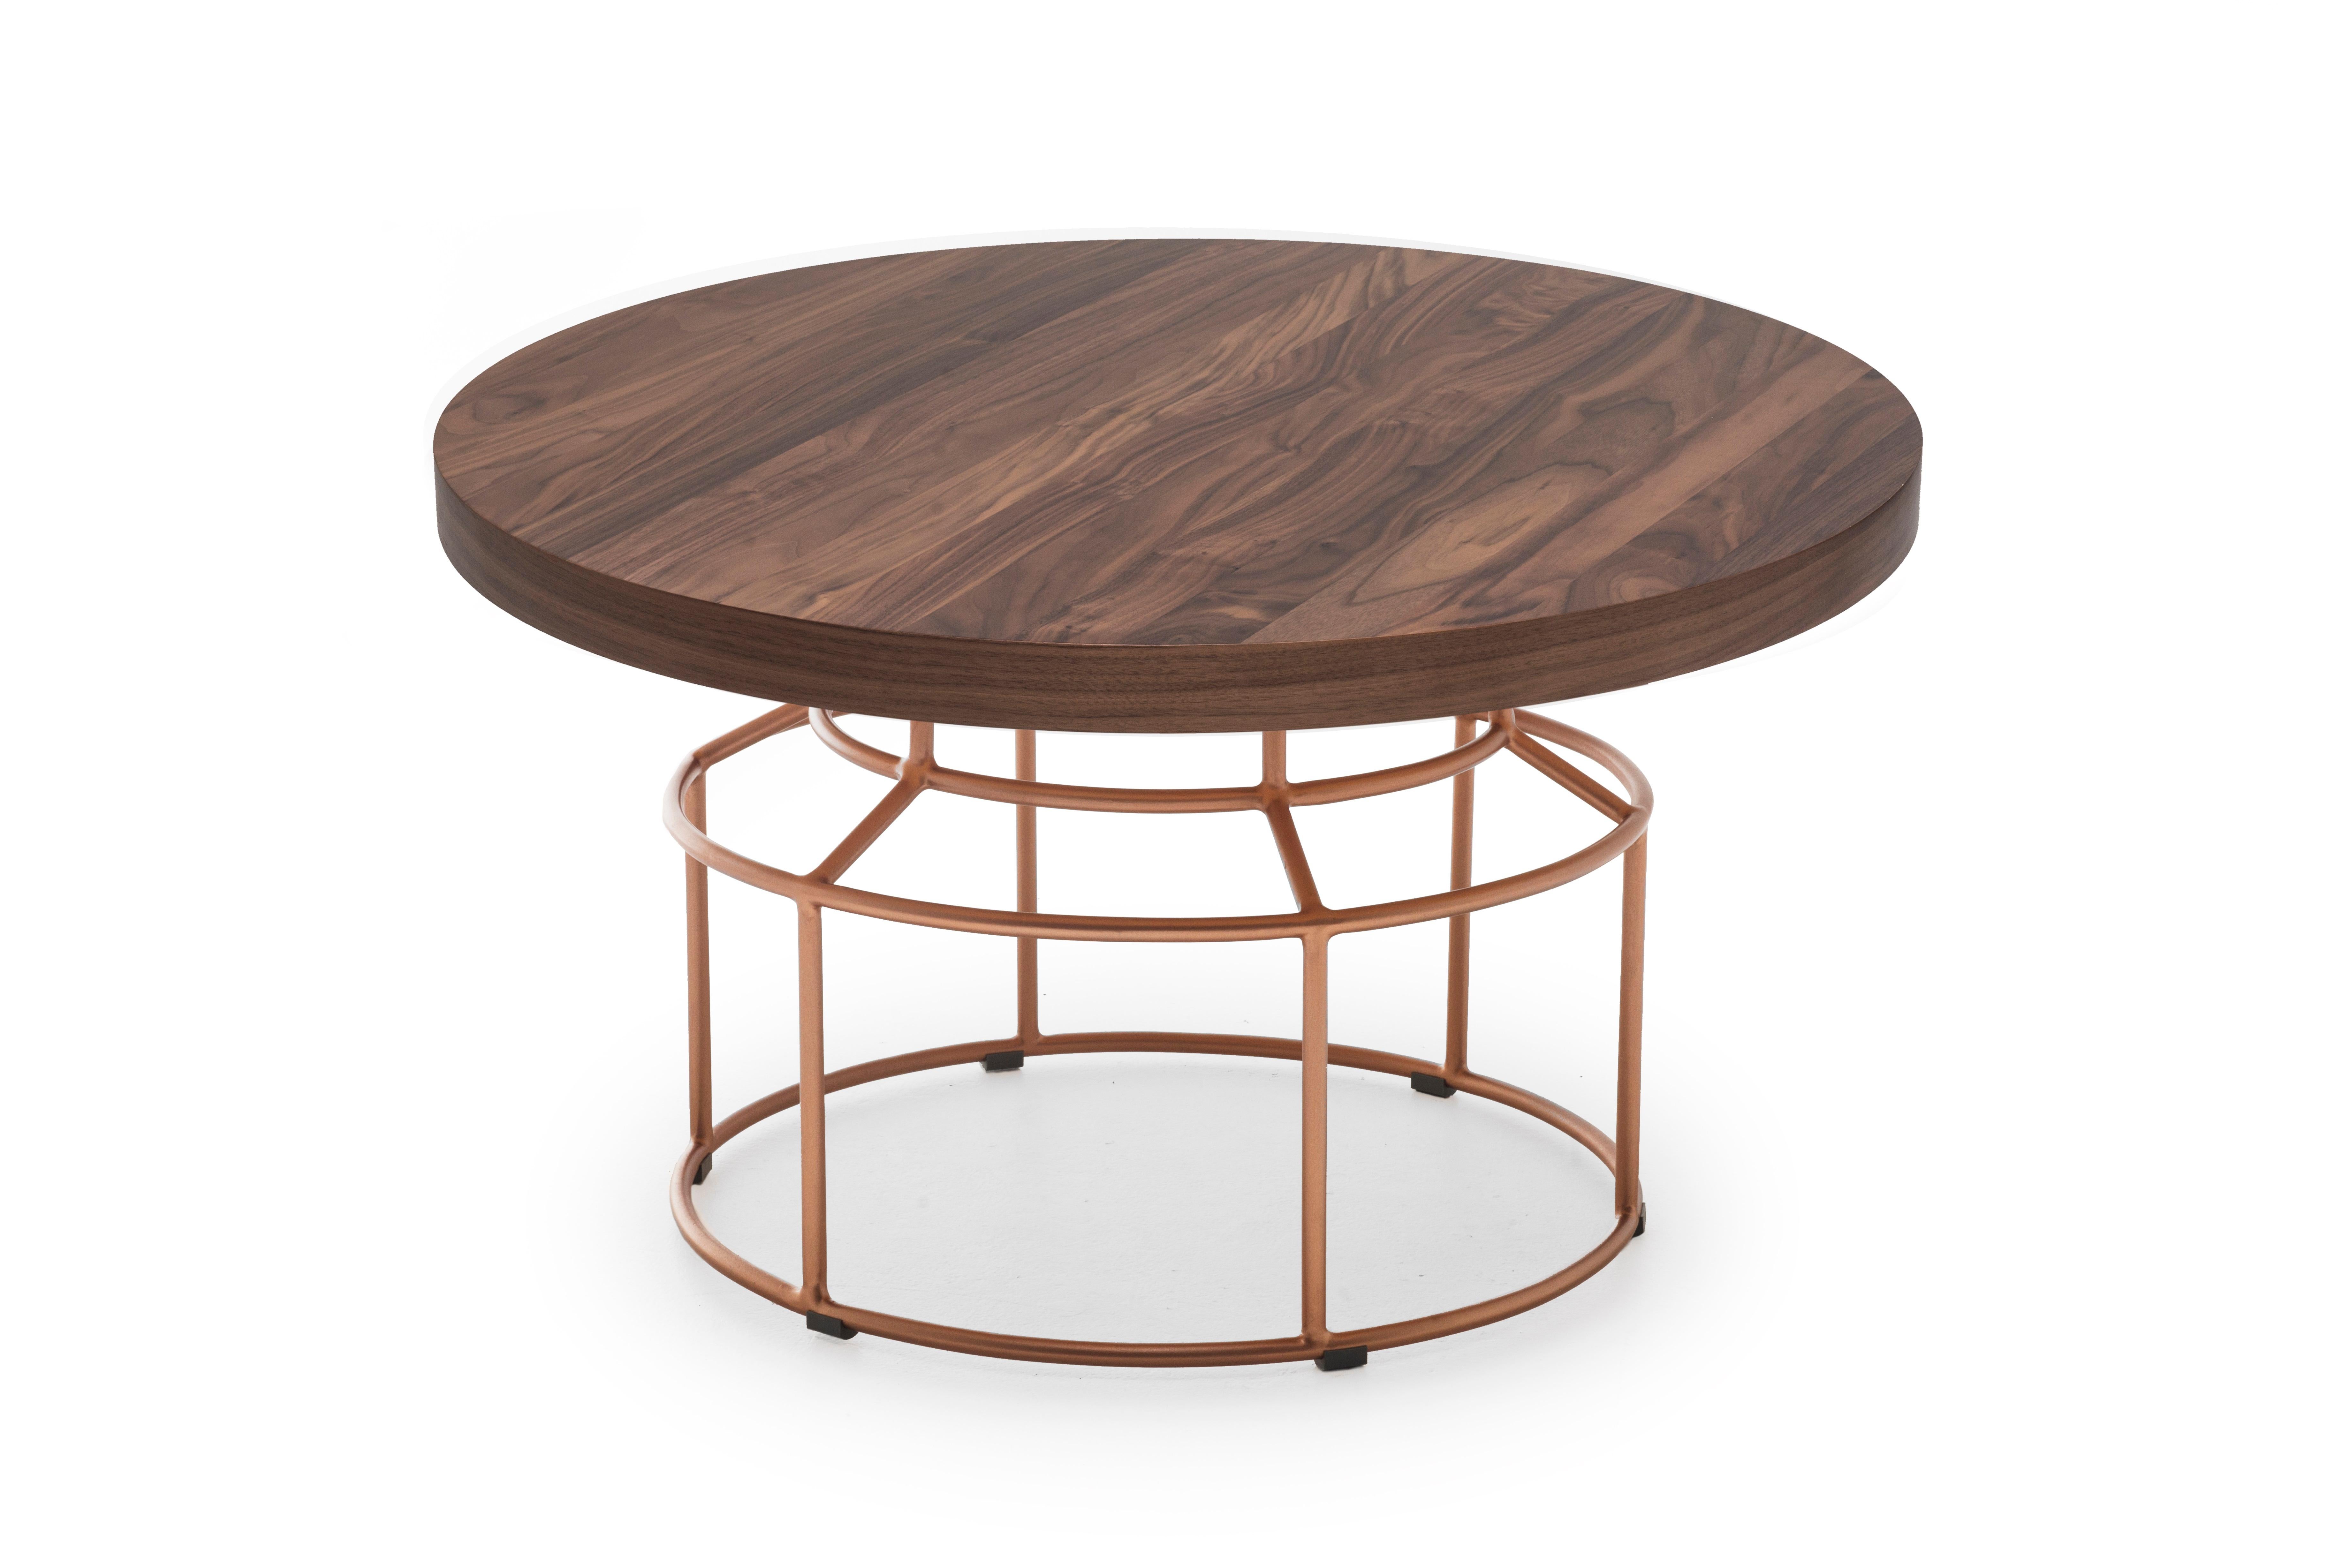 Indoor high mason coffee table by Kenneth Cobonpue.
Materials: Walnut, Steel. 
Also available in other colors.
Dimensions: Diameter 70cm x H 45cm 

Jars are typically placed on shelves and cupboards. Mason is a reimagining of that, transforming